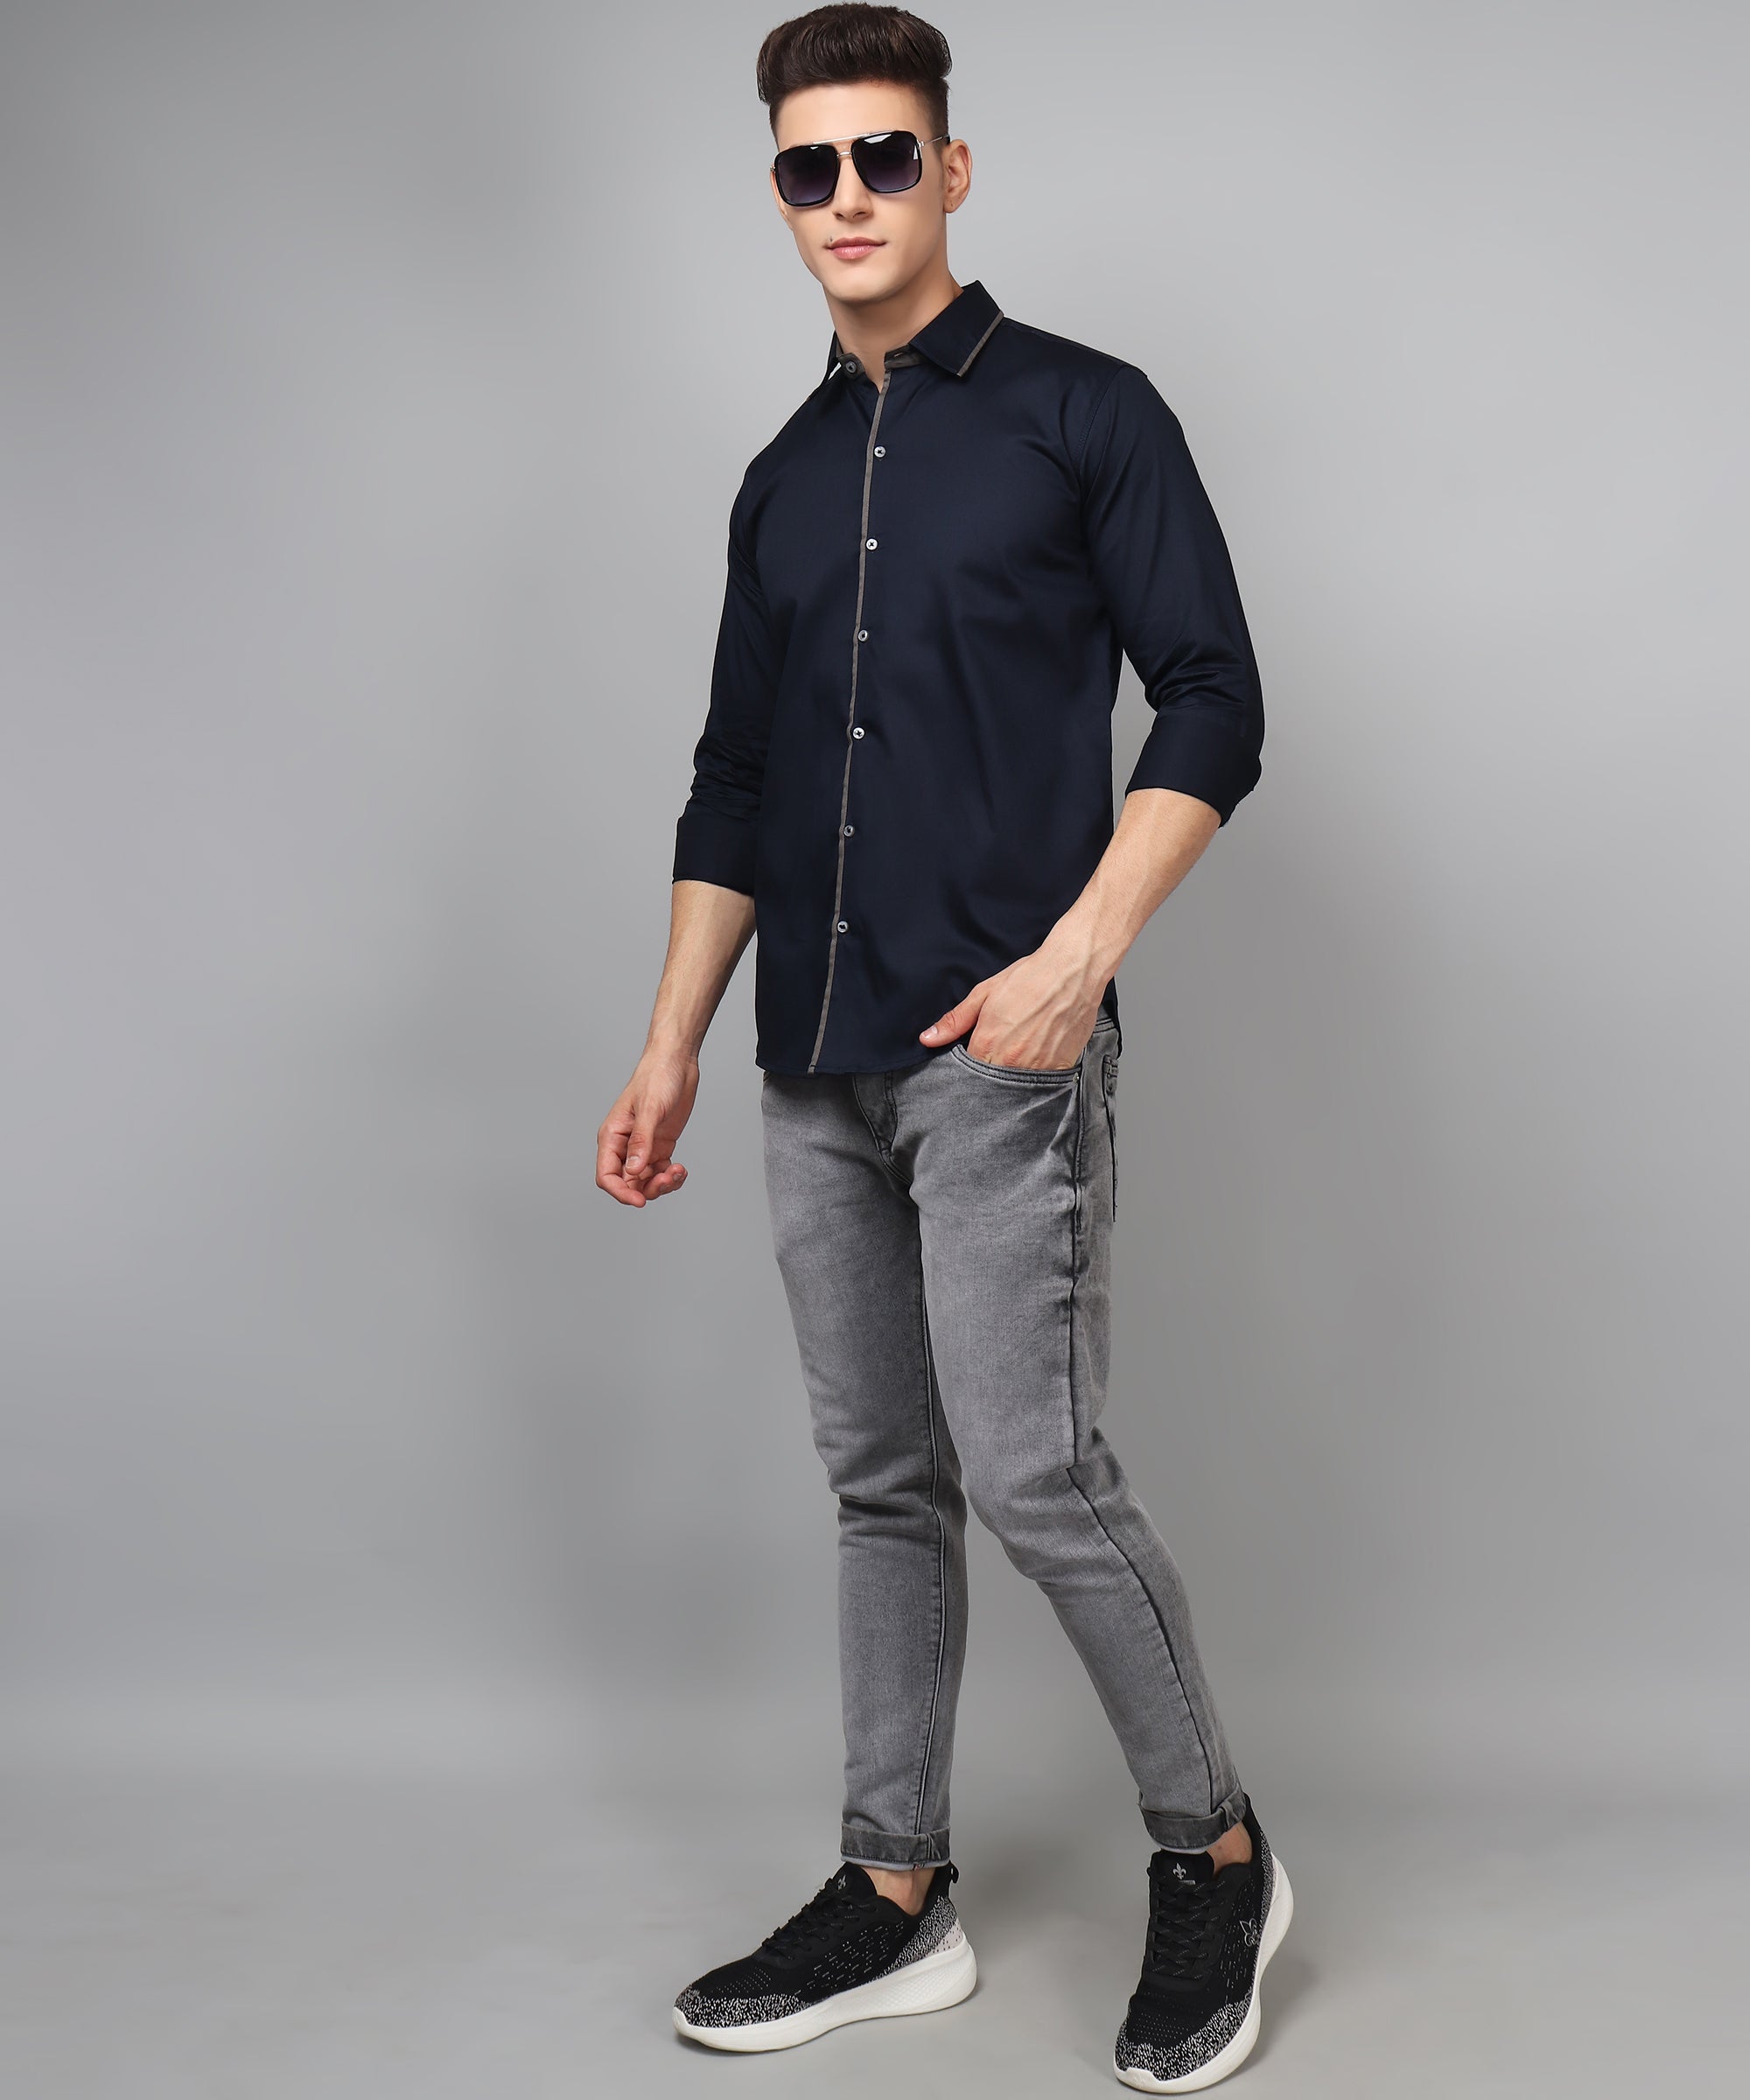 Dress to Impress: Unveiling the Hottest Party Wear Shirts for Men's Night Out Ensembles